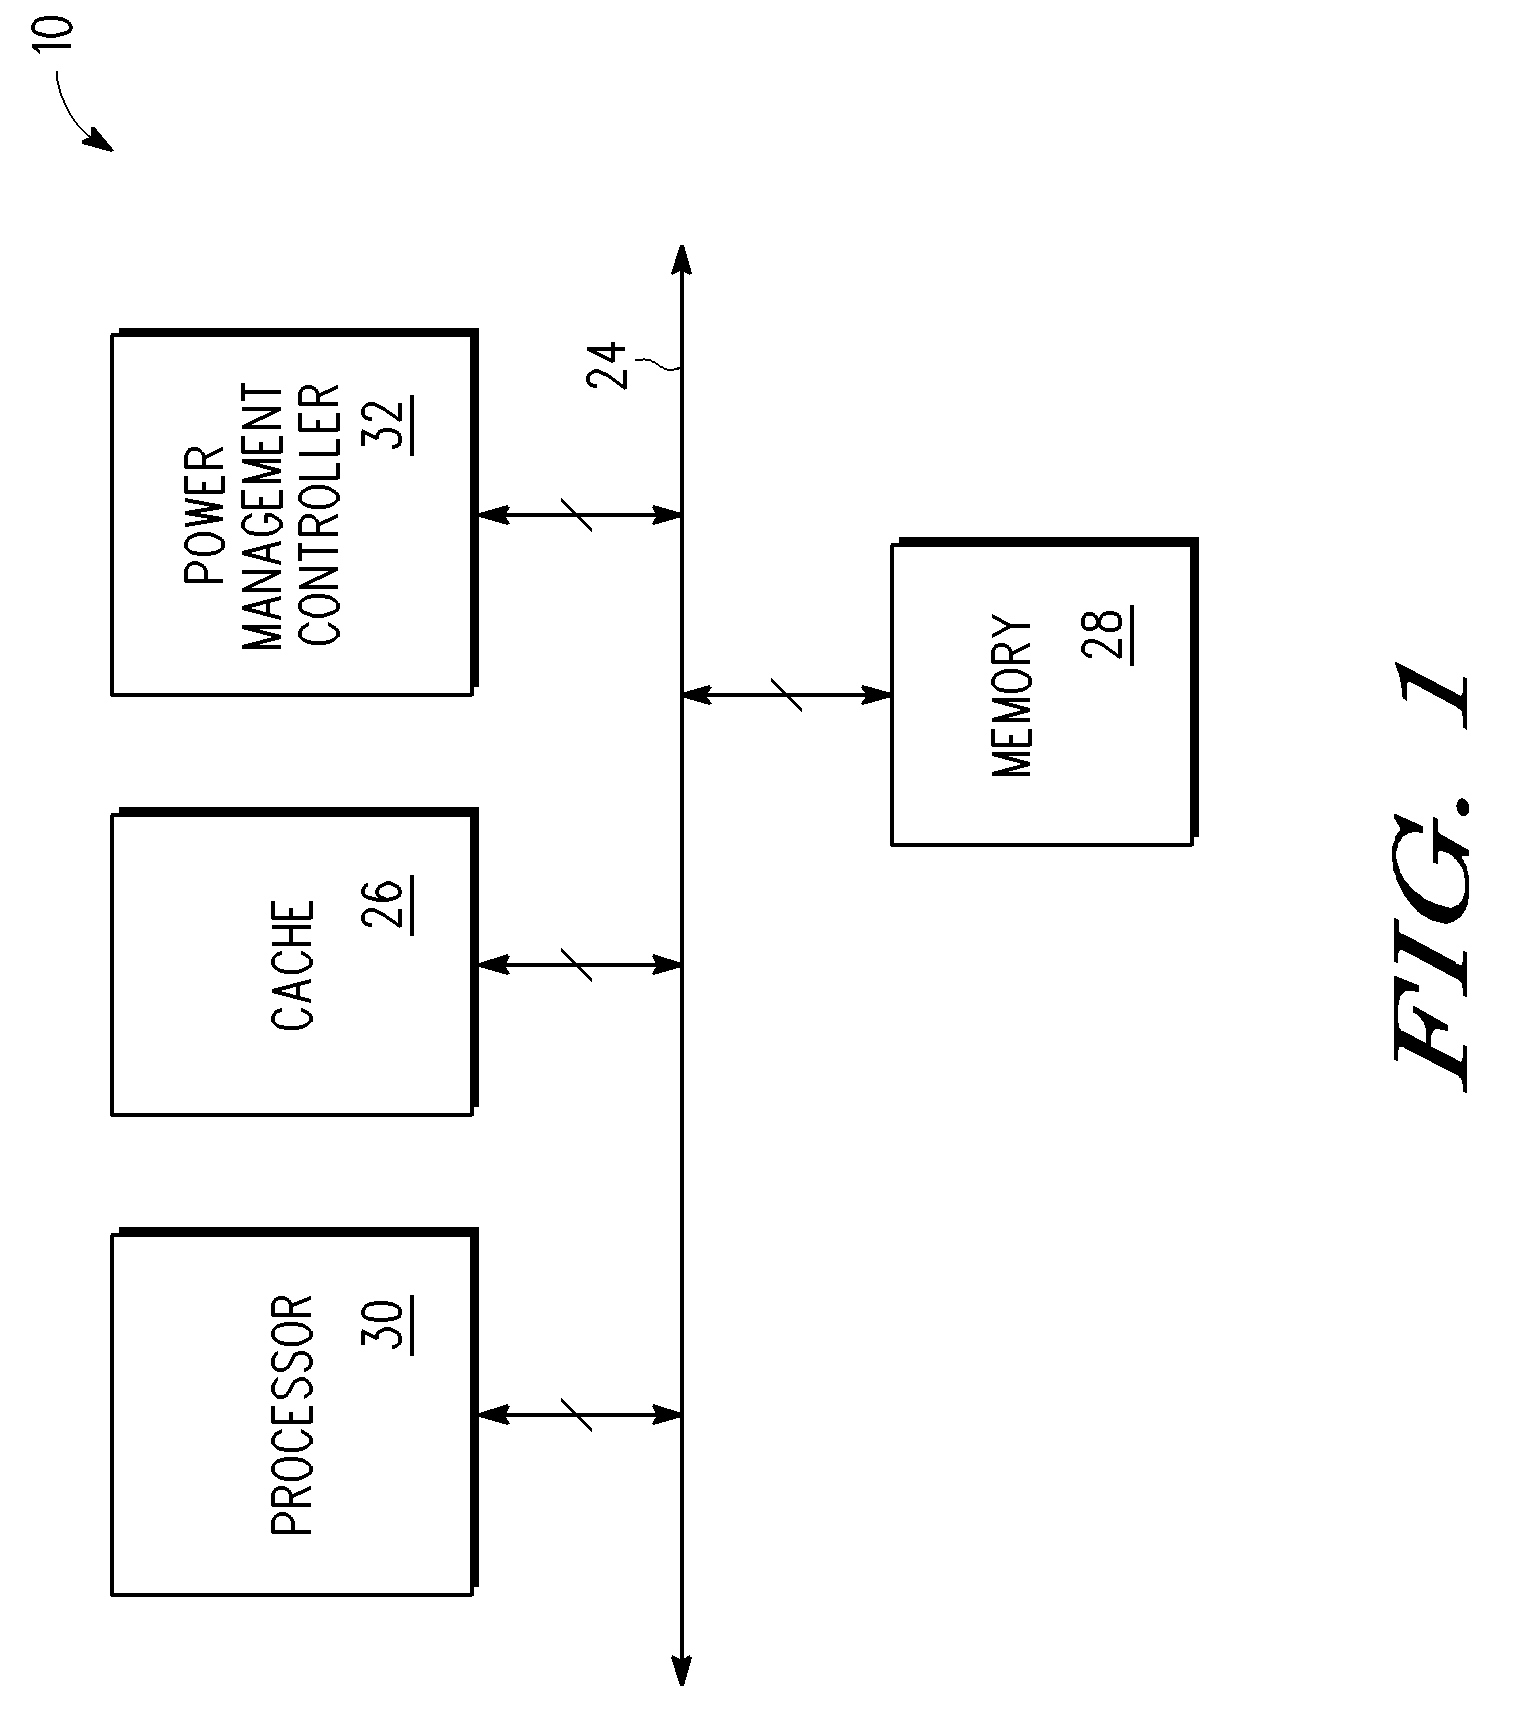 Voltage-based memory size scaling in a data processing system